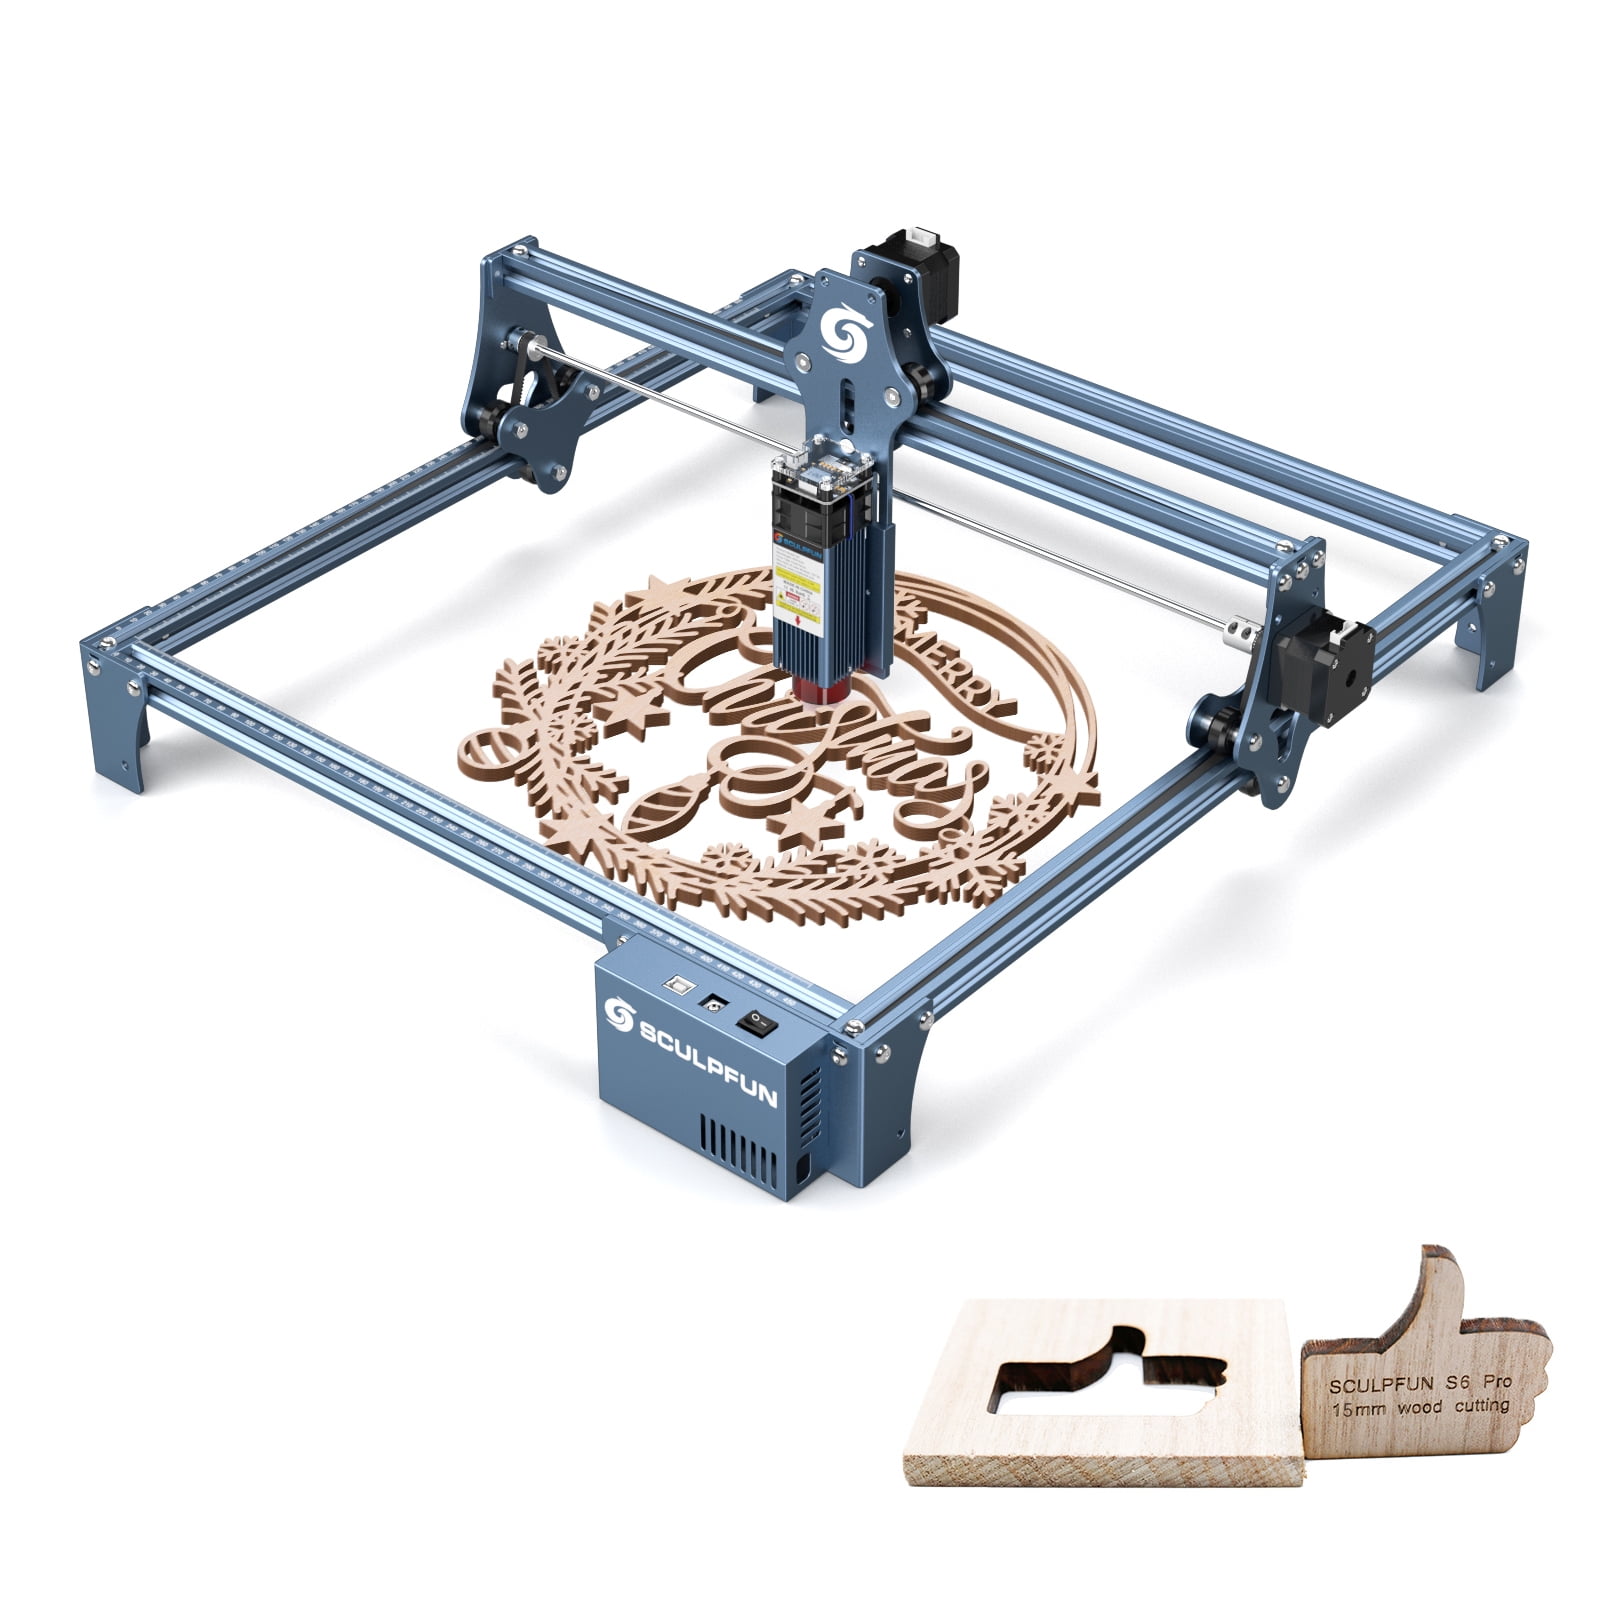 Tick prototype I fare SCULPFUN S9 Engraving Machine Ultra-thin Beam Shaping Technology High- Wood  Acrylic Engraver Cutting Machine 410x420mm Engraving Area Full Metal  Structure Quick Assembly Design - Walmart.com